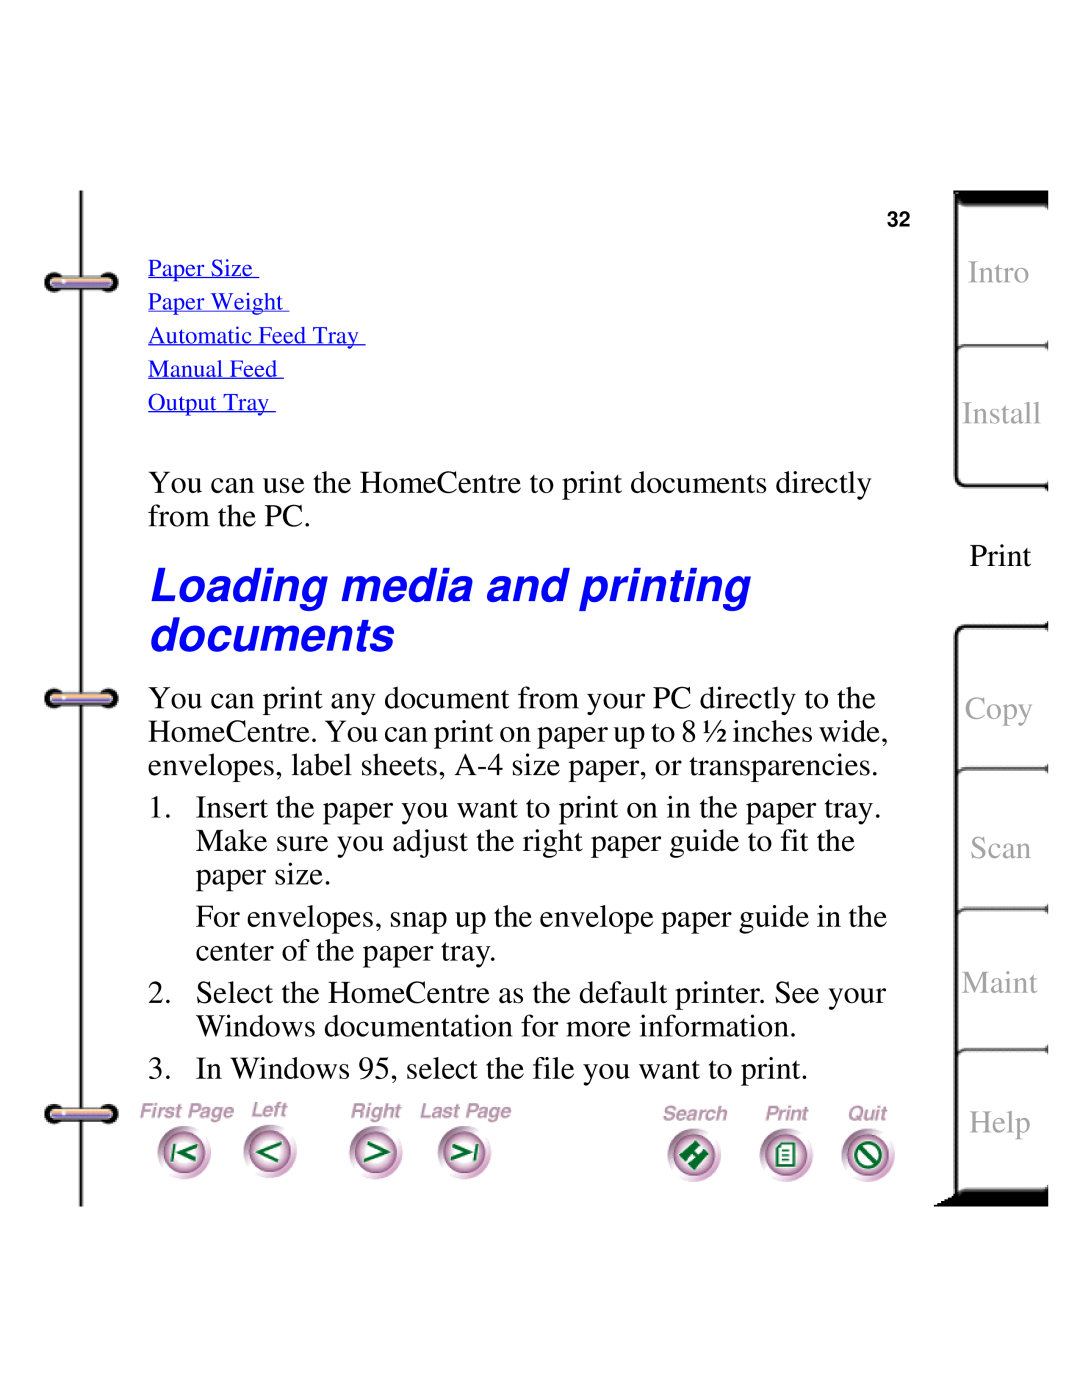 Xerox Document HomeCentre manual Loading media and printing documents, Copy Scan Maint Help, Intro Install 